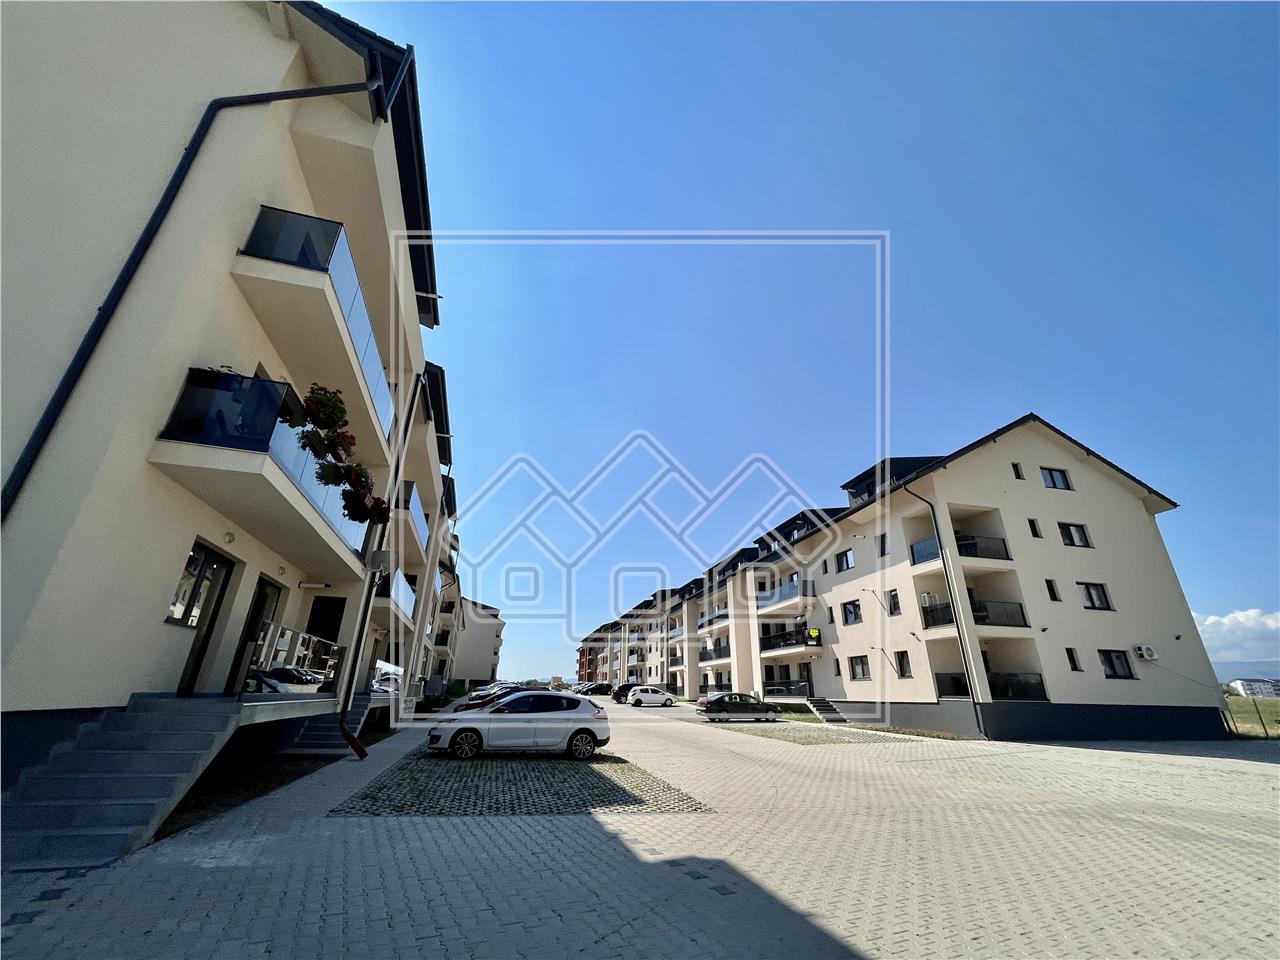 Apartment for sale in Sibiu - 2 rooms - new and detached